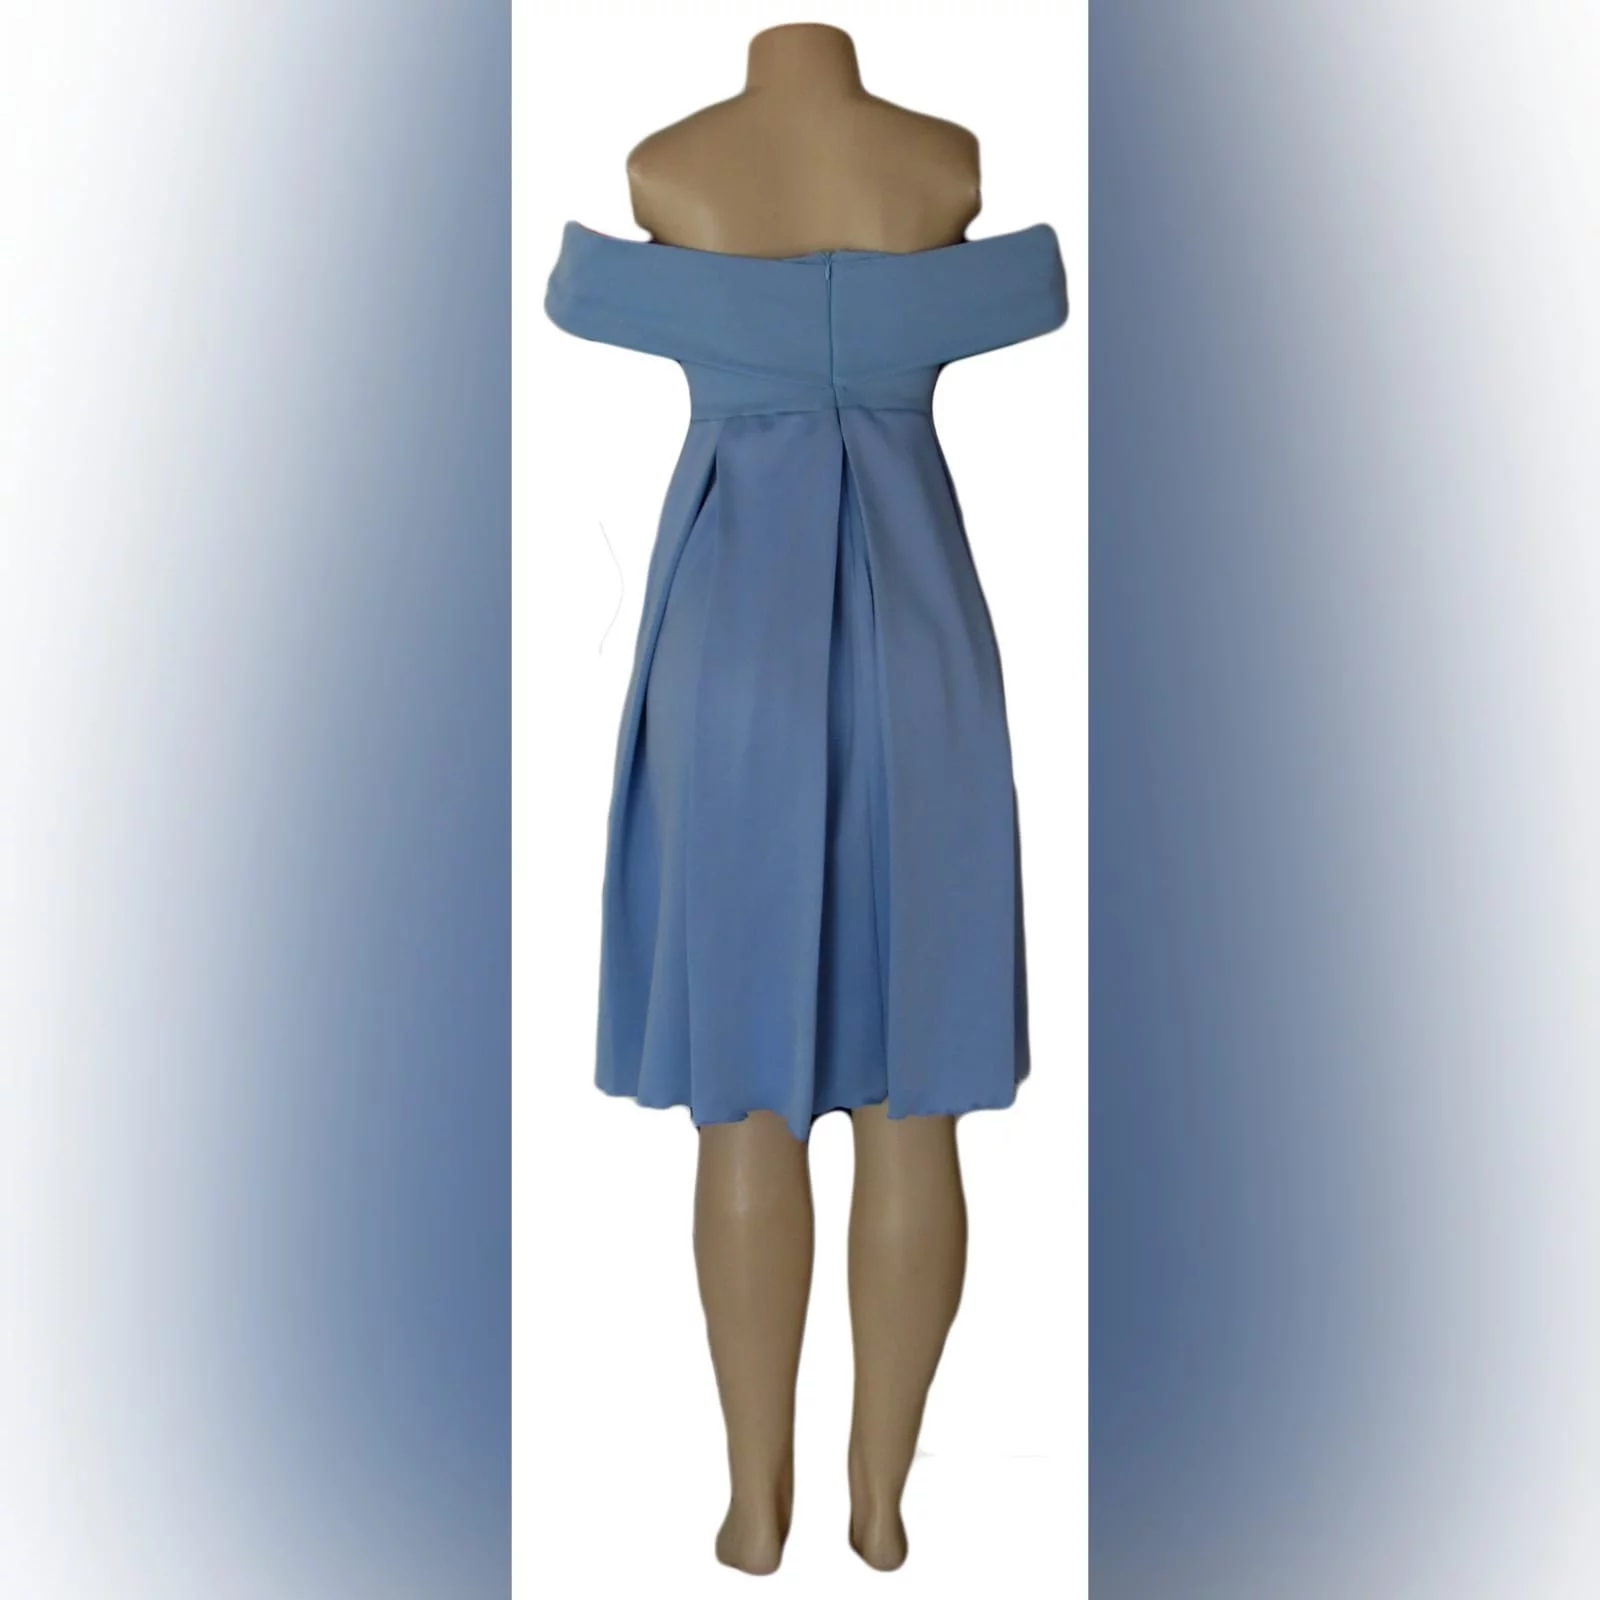 Short pale blue pleated cocktail dress 5 short pale blue pleated cocktail dress with a crossed bust design creating off shoulder short sleeves, pleated bottom with pockets.